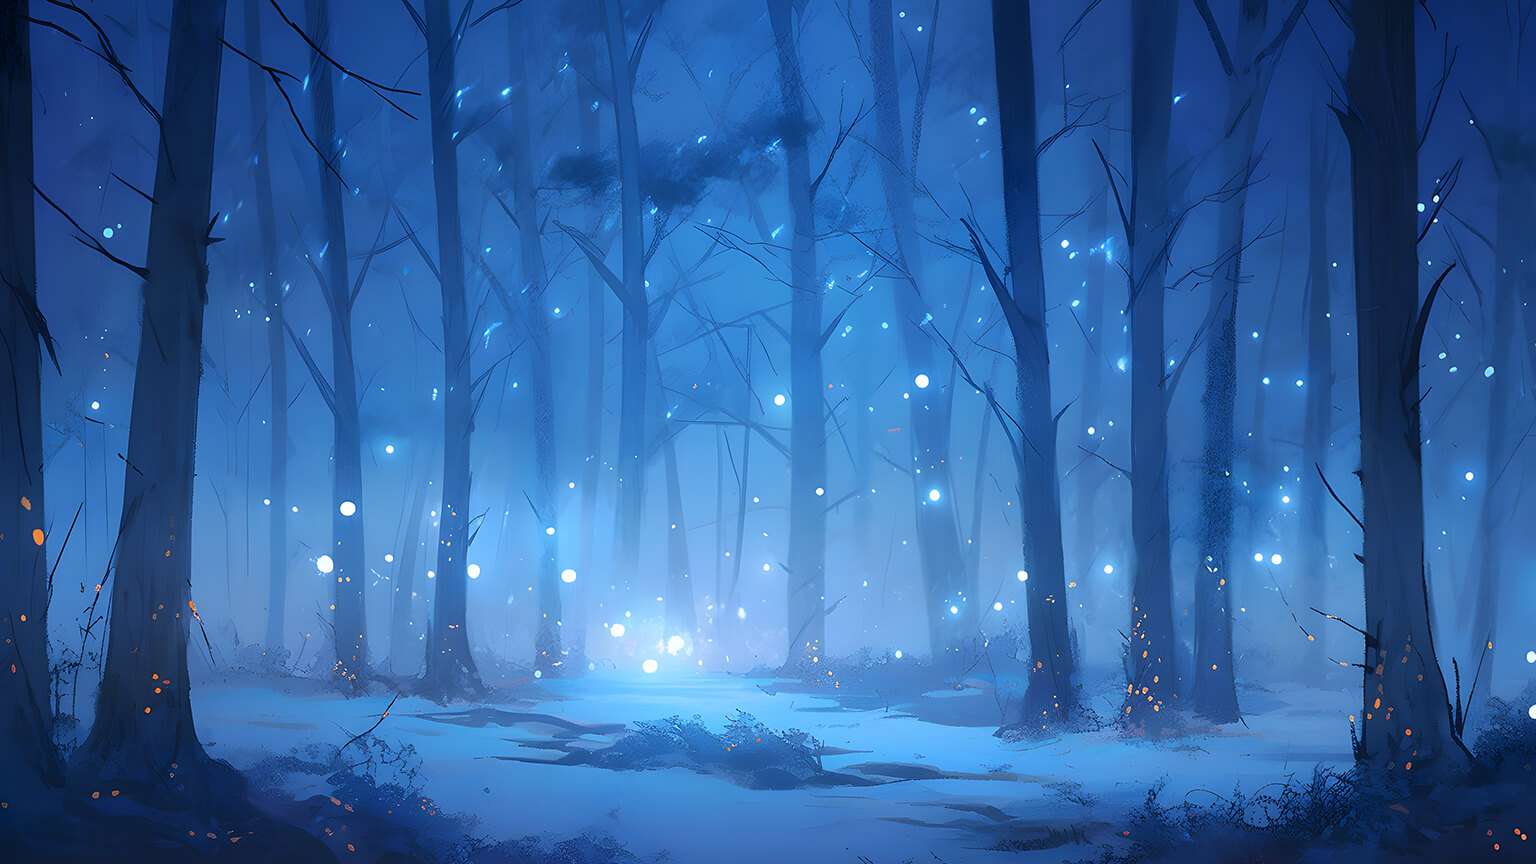 Magical Snow-Covered Forest Night Desktop Wallpaper Free in 4K